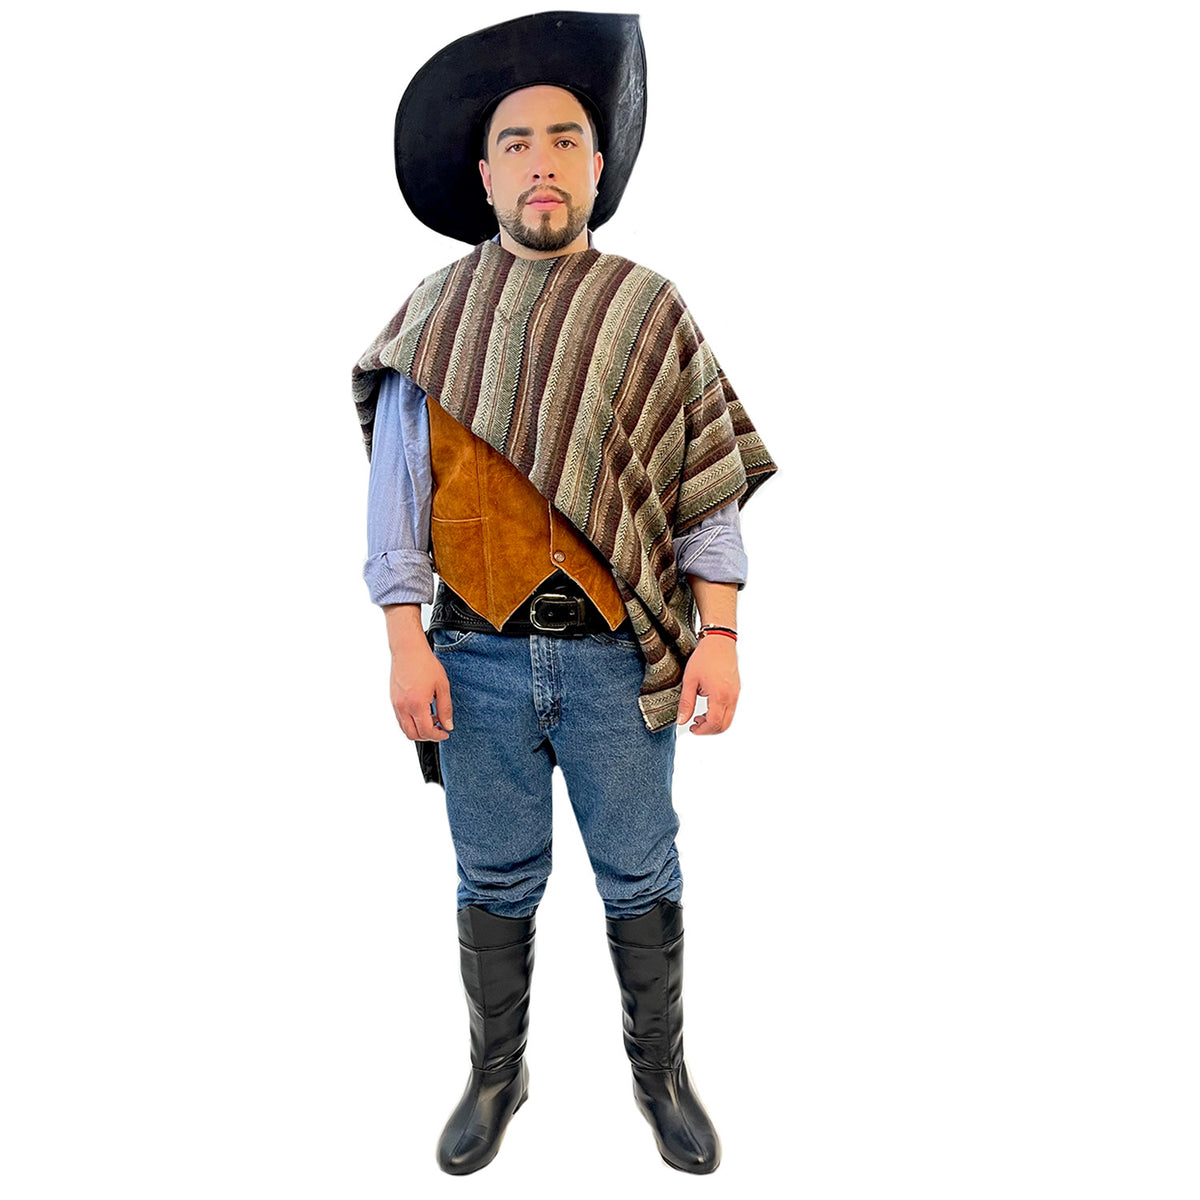 Exclusive Wild West Cowboy Dirty Dan Adult Costume w/ Holster and Hat